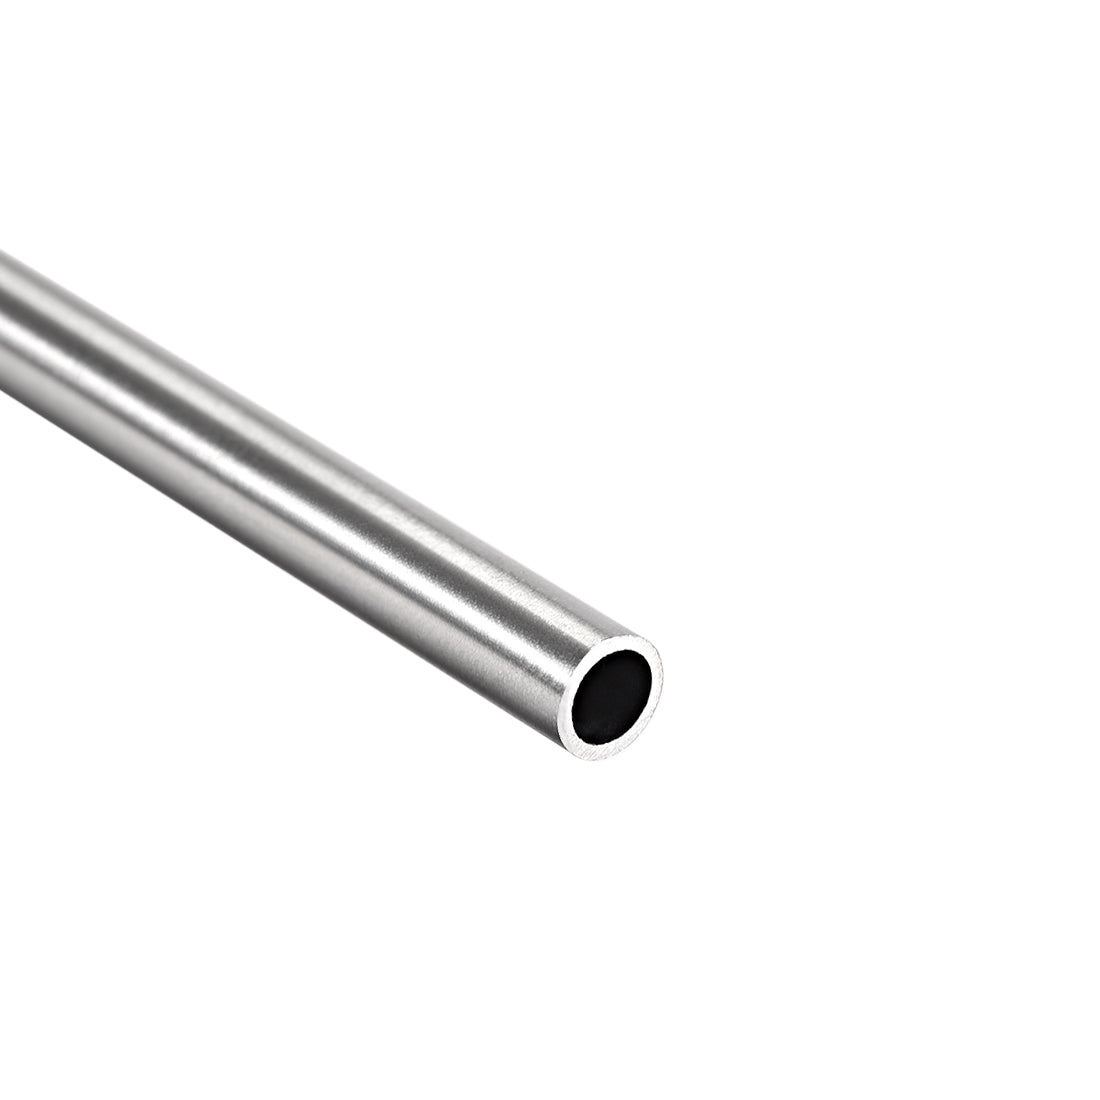 Uxcell Uxcell 304 Stainless Steel Round Tubing 5mm OD 1mm Wall Thickness 250mm Length Seamless Straight Pipe Tube 2 Pcs